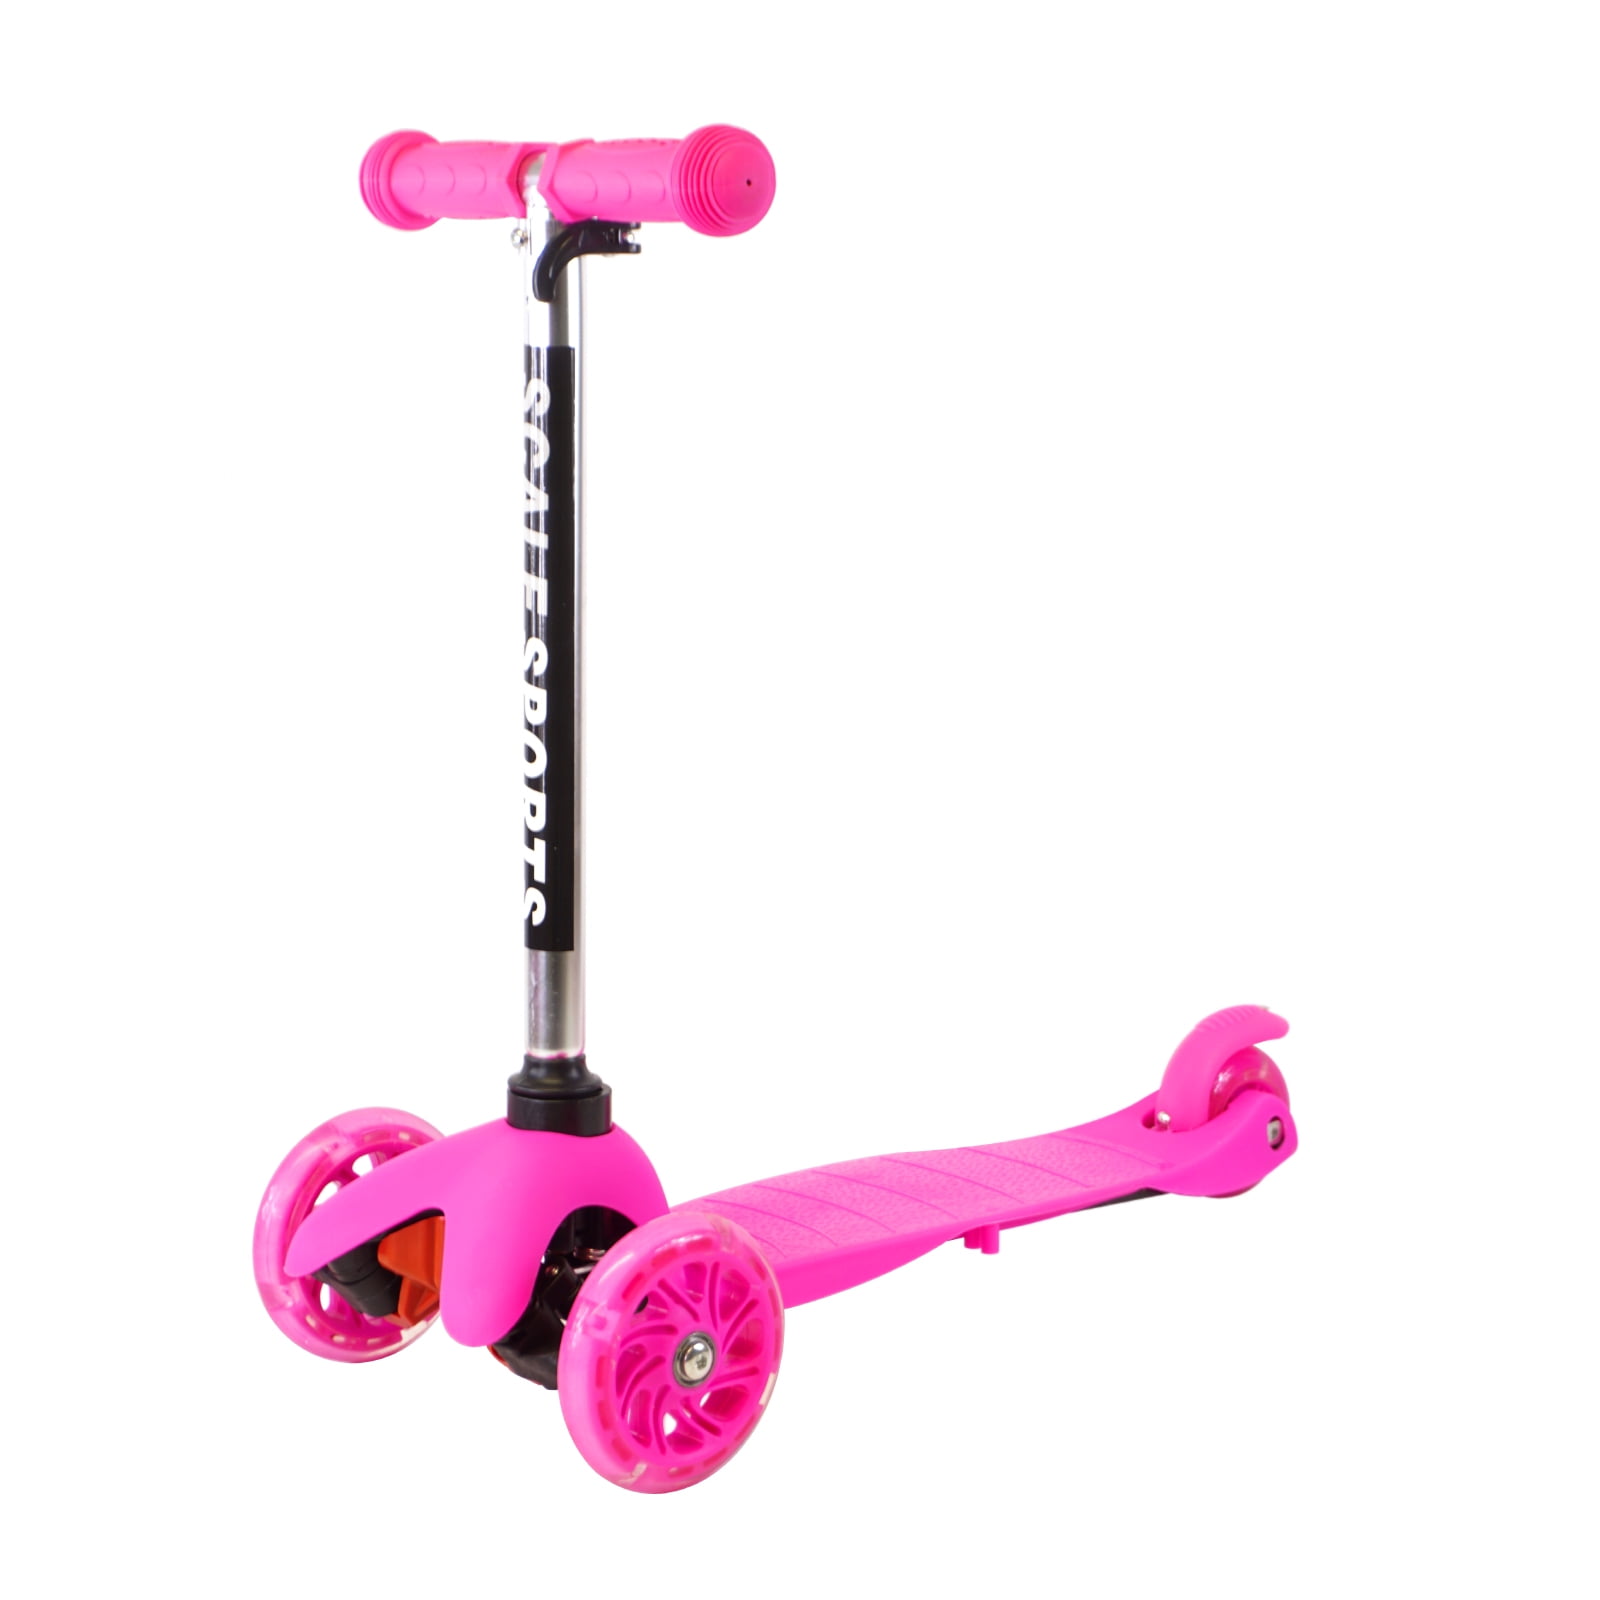 Four Wheel Scooter for kids Pink frog motion back wheels with light new model 